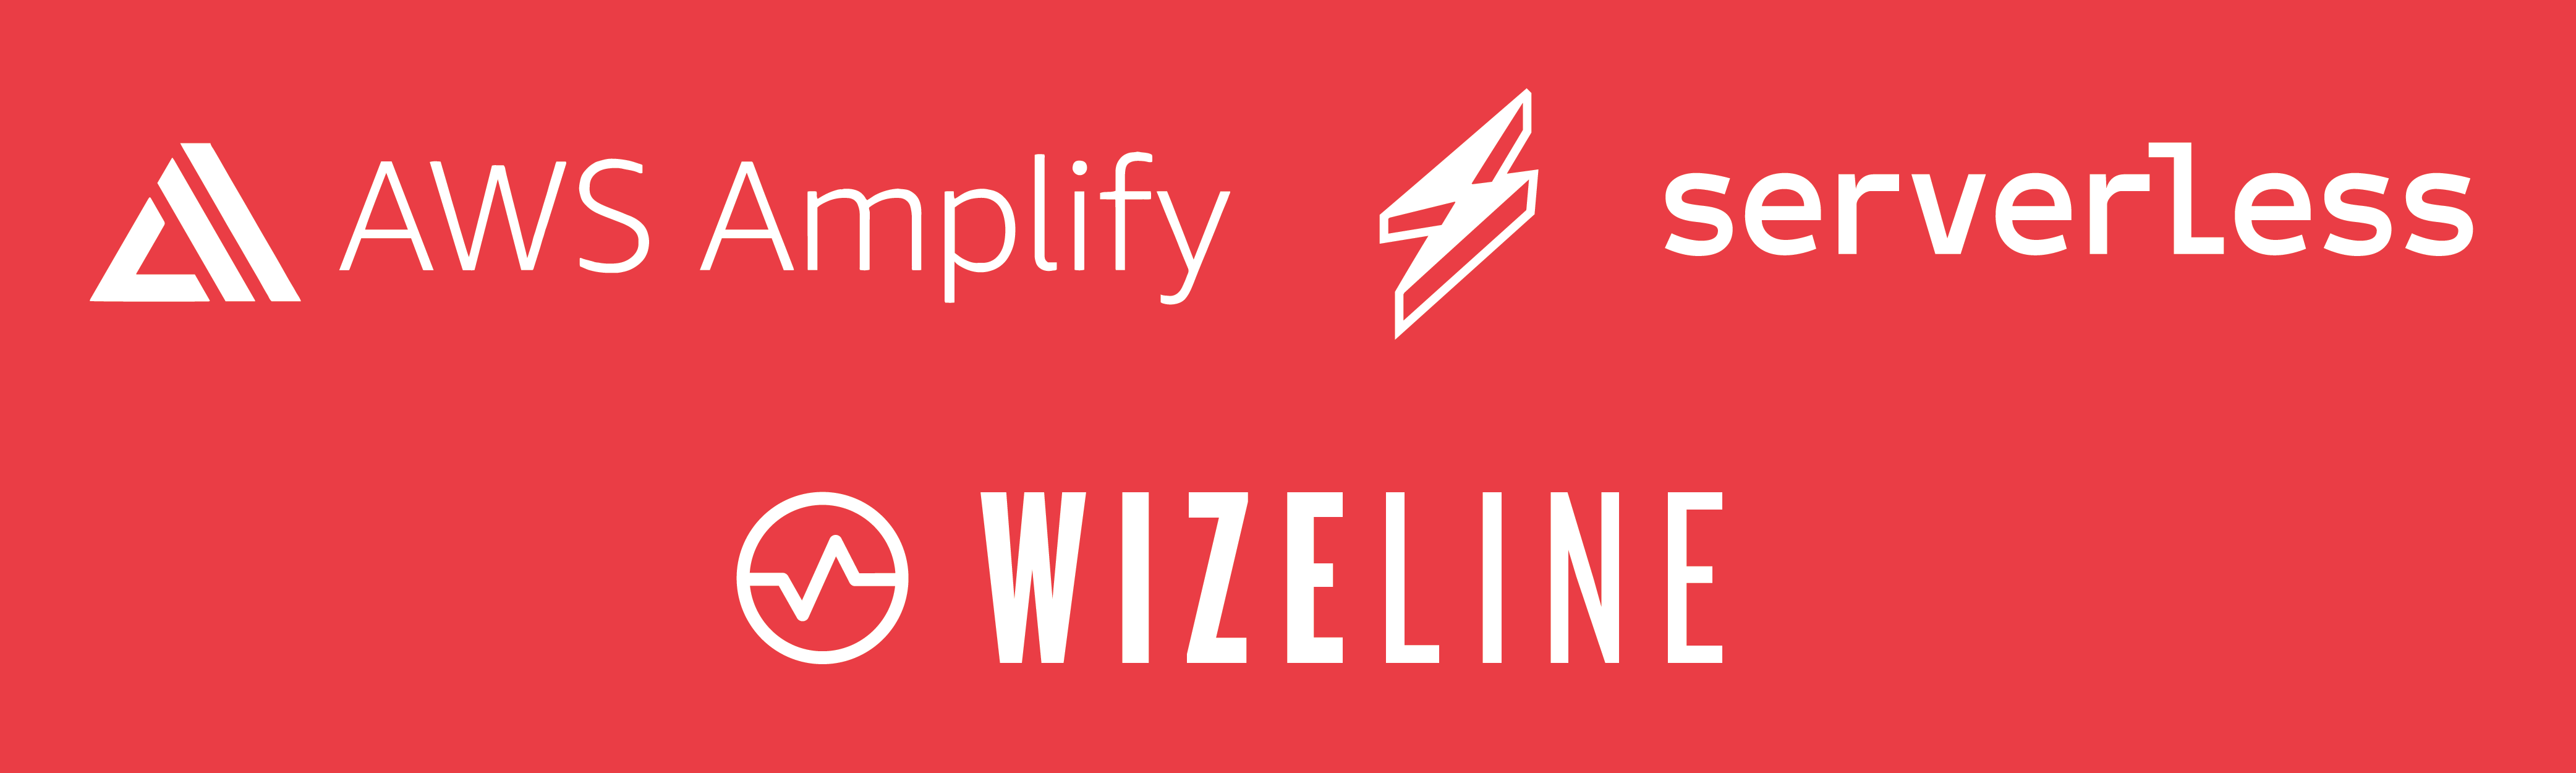 wizeline, serverless, and amplify banner